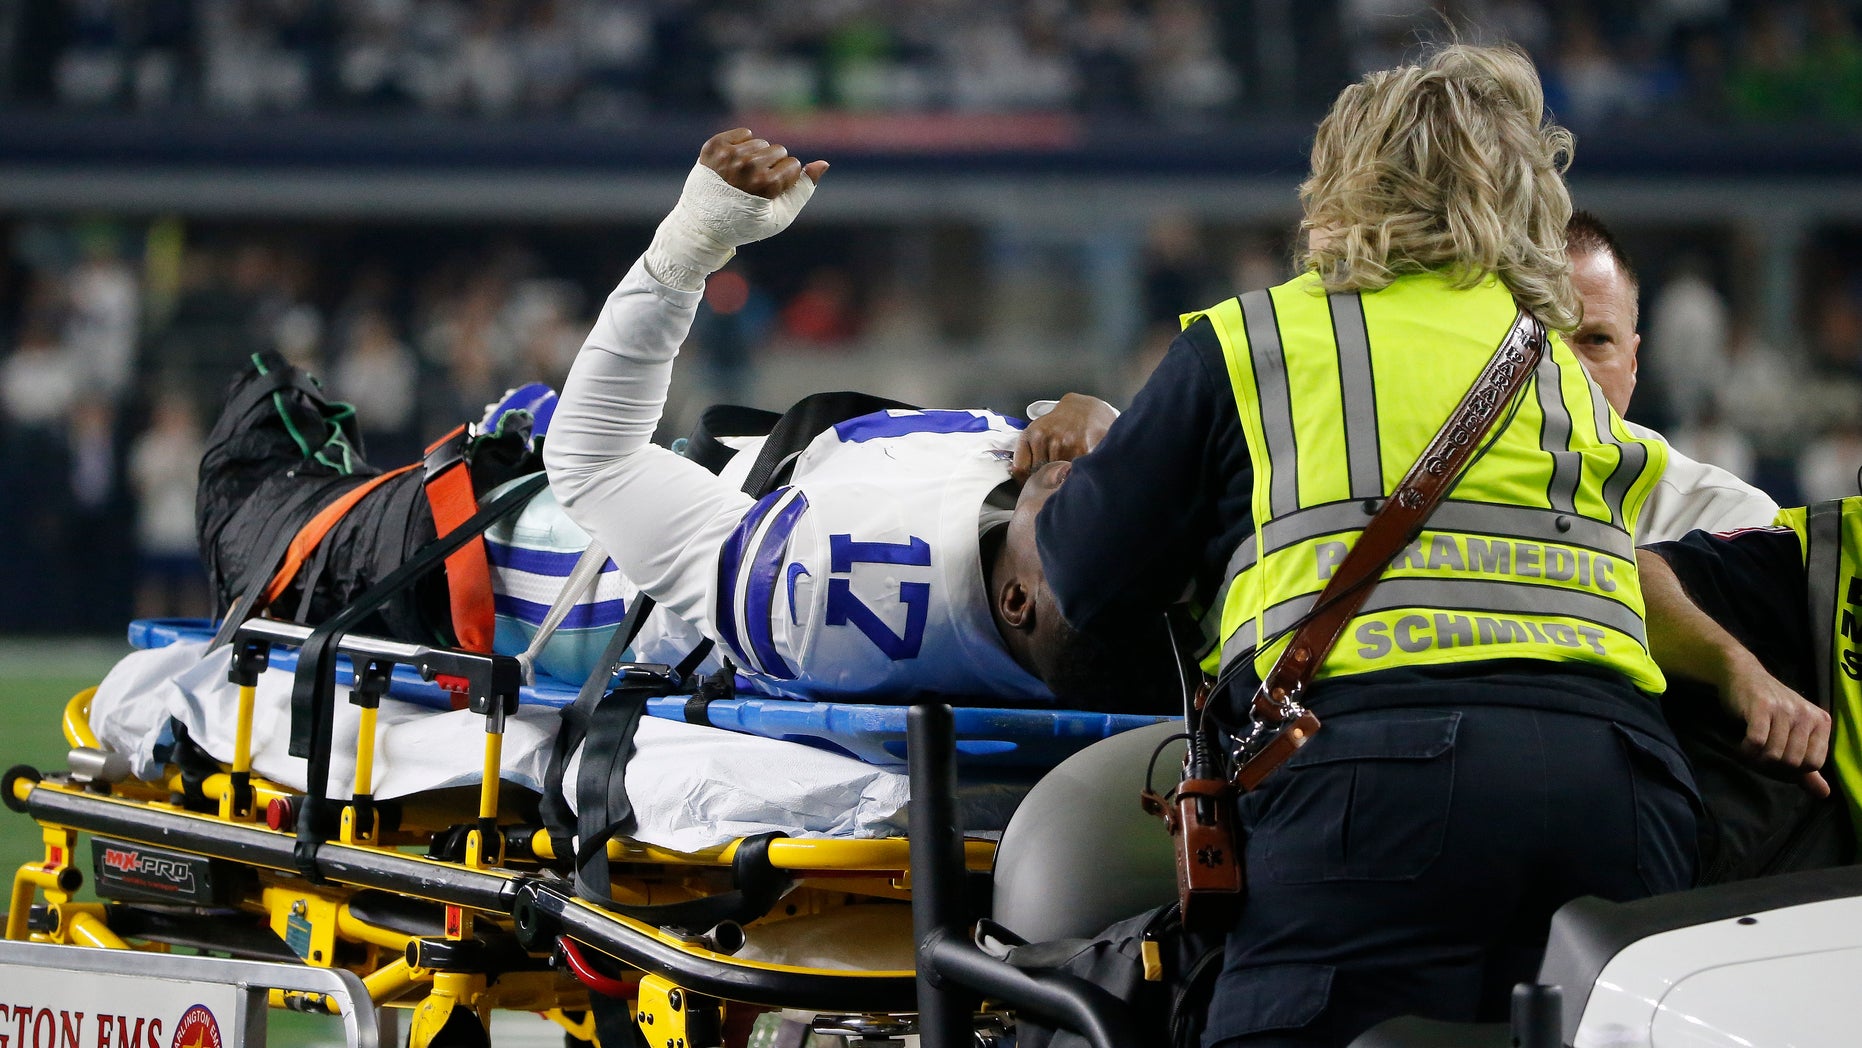 Dallas Cowboys player Allen Hurns suffers gruesome leg injury in